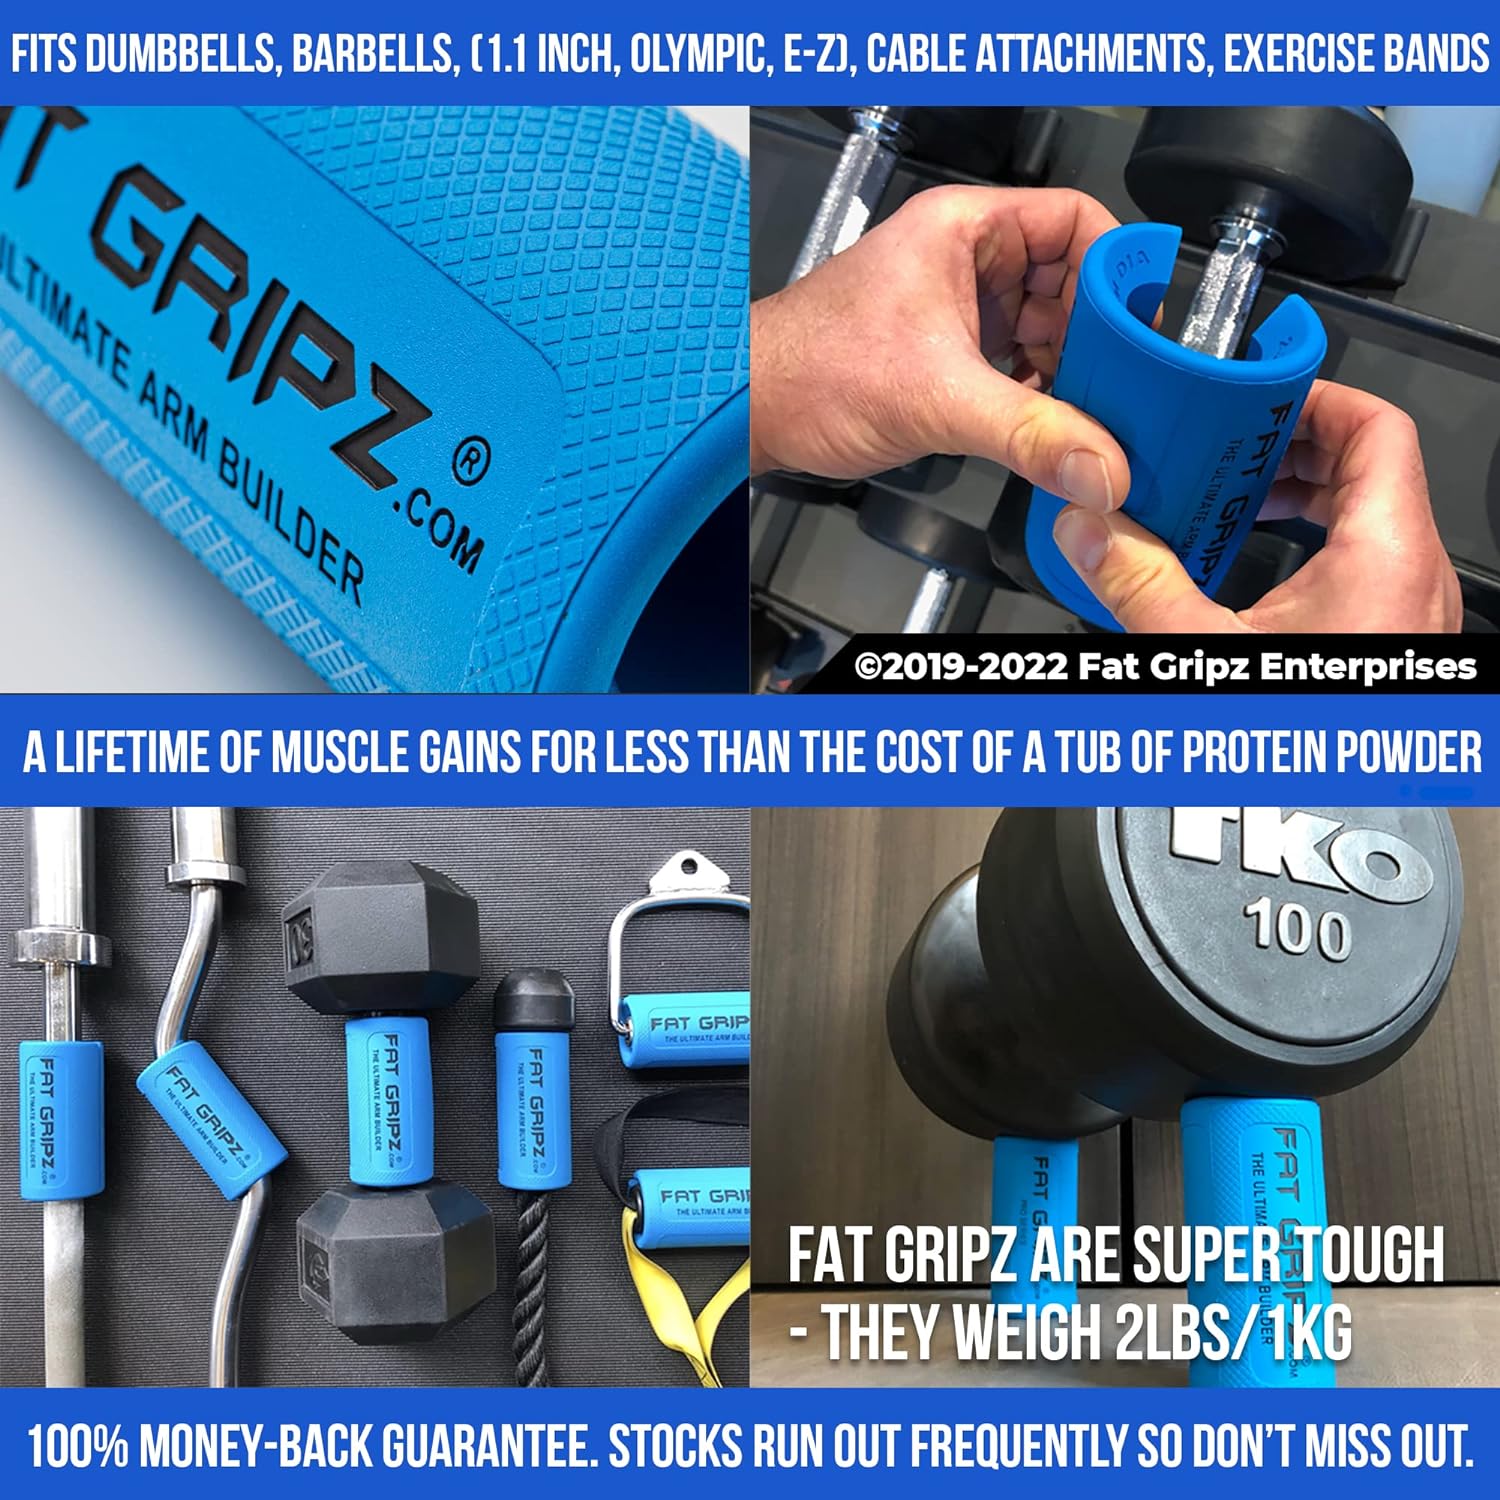 Fat Gripz Pro - The Simple Proven Way to Get Big Biceps  Forearms Fast - at Home Or in The Gym (Winner of 3 Men’s Health Magazine Awards) (2.25” Outer Diameter)